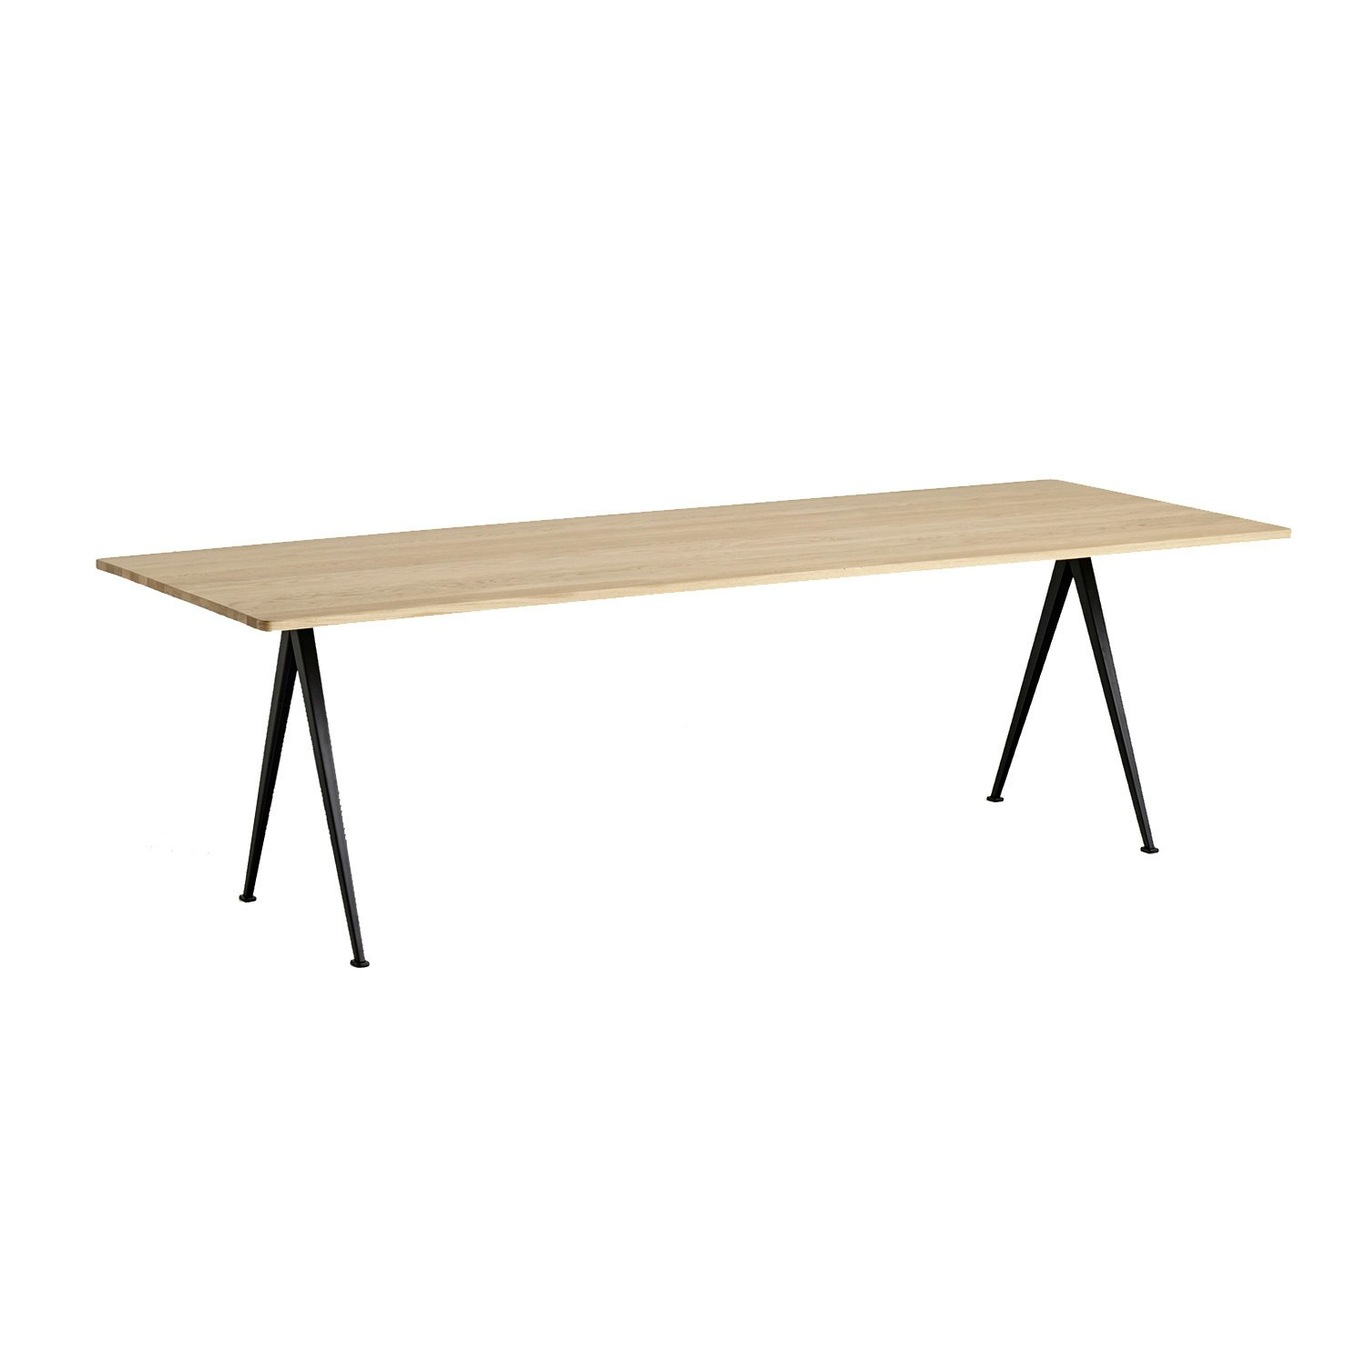 Pyramid 02 Dining Table 85x250 cm, Black / Matte Lacquered Oak